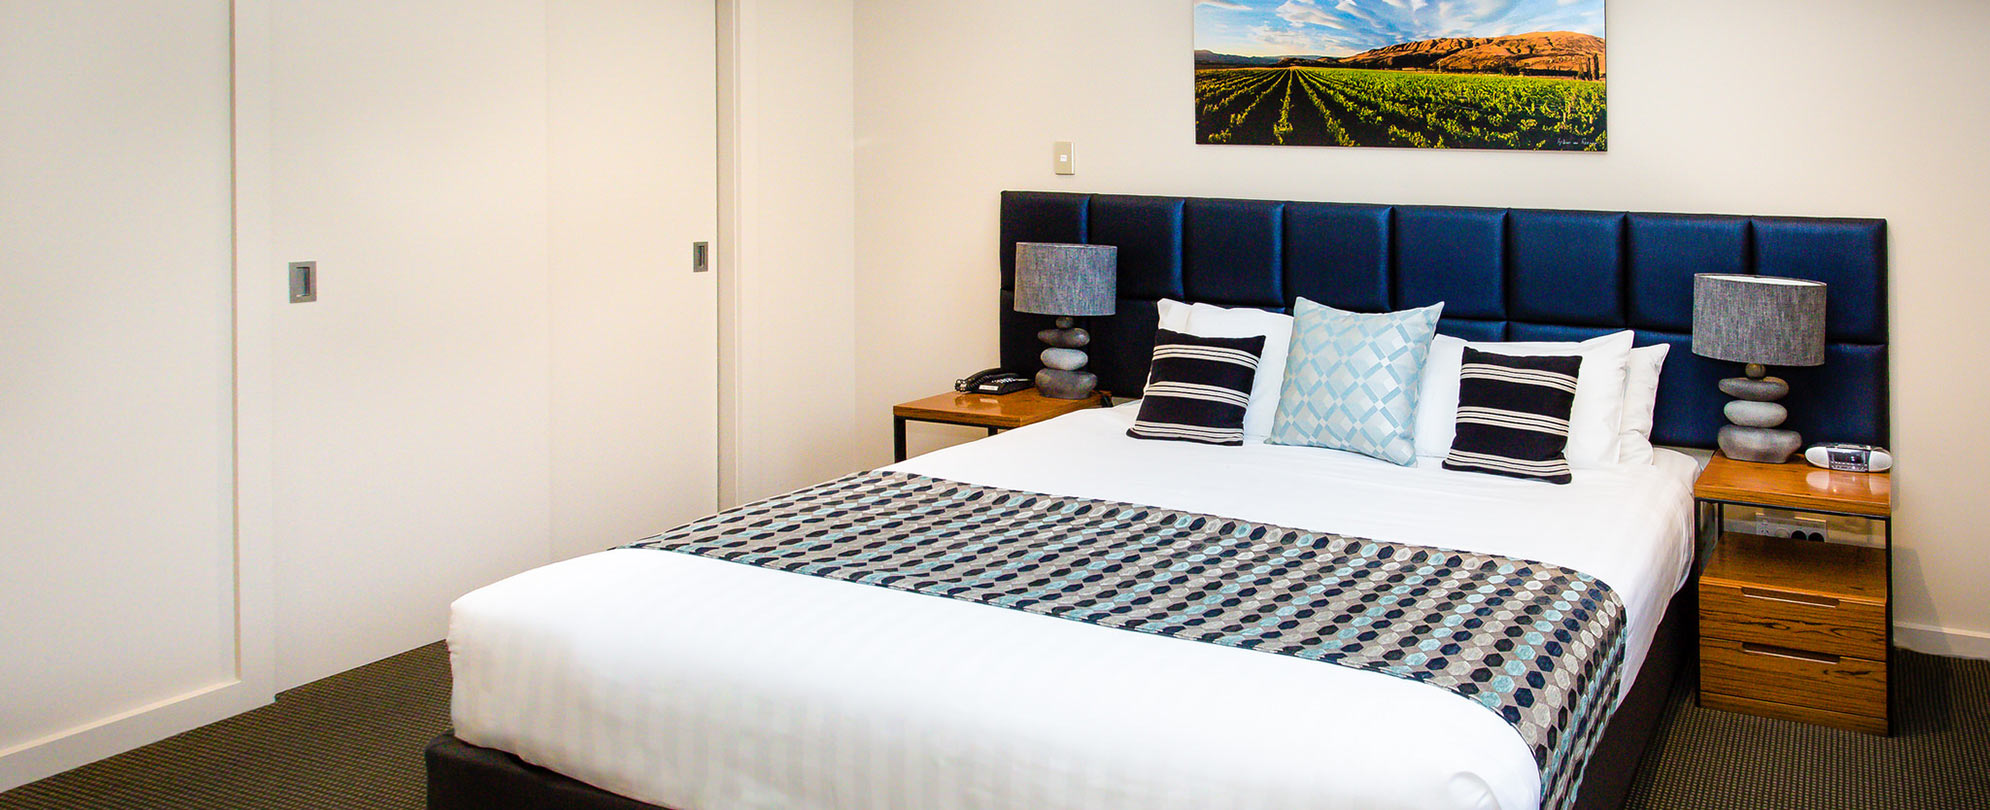 The bedroom of a standard suite at Club Wyndham Wanaka.